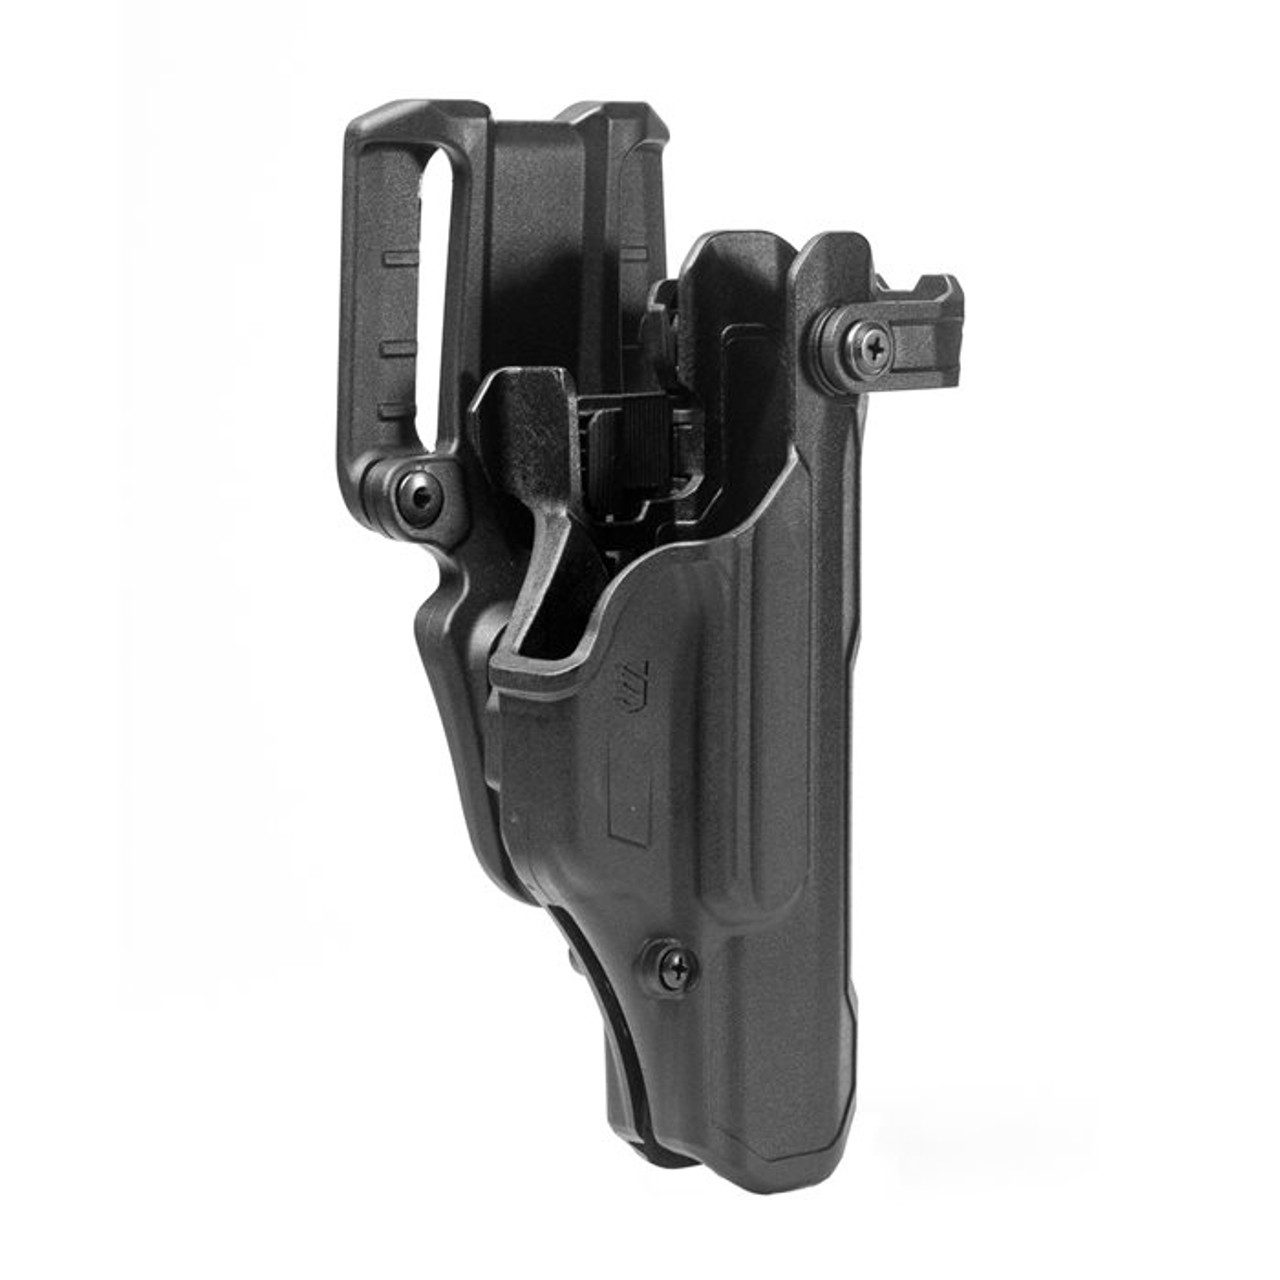 Blackhawk T-Series Level 3 Duty Non-Light Bearing Holsters for Sig P320 TLR  1/2 Right Hand - Botach®